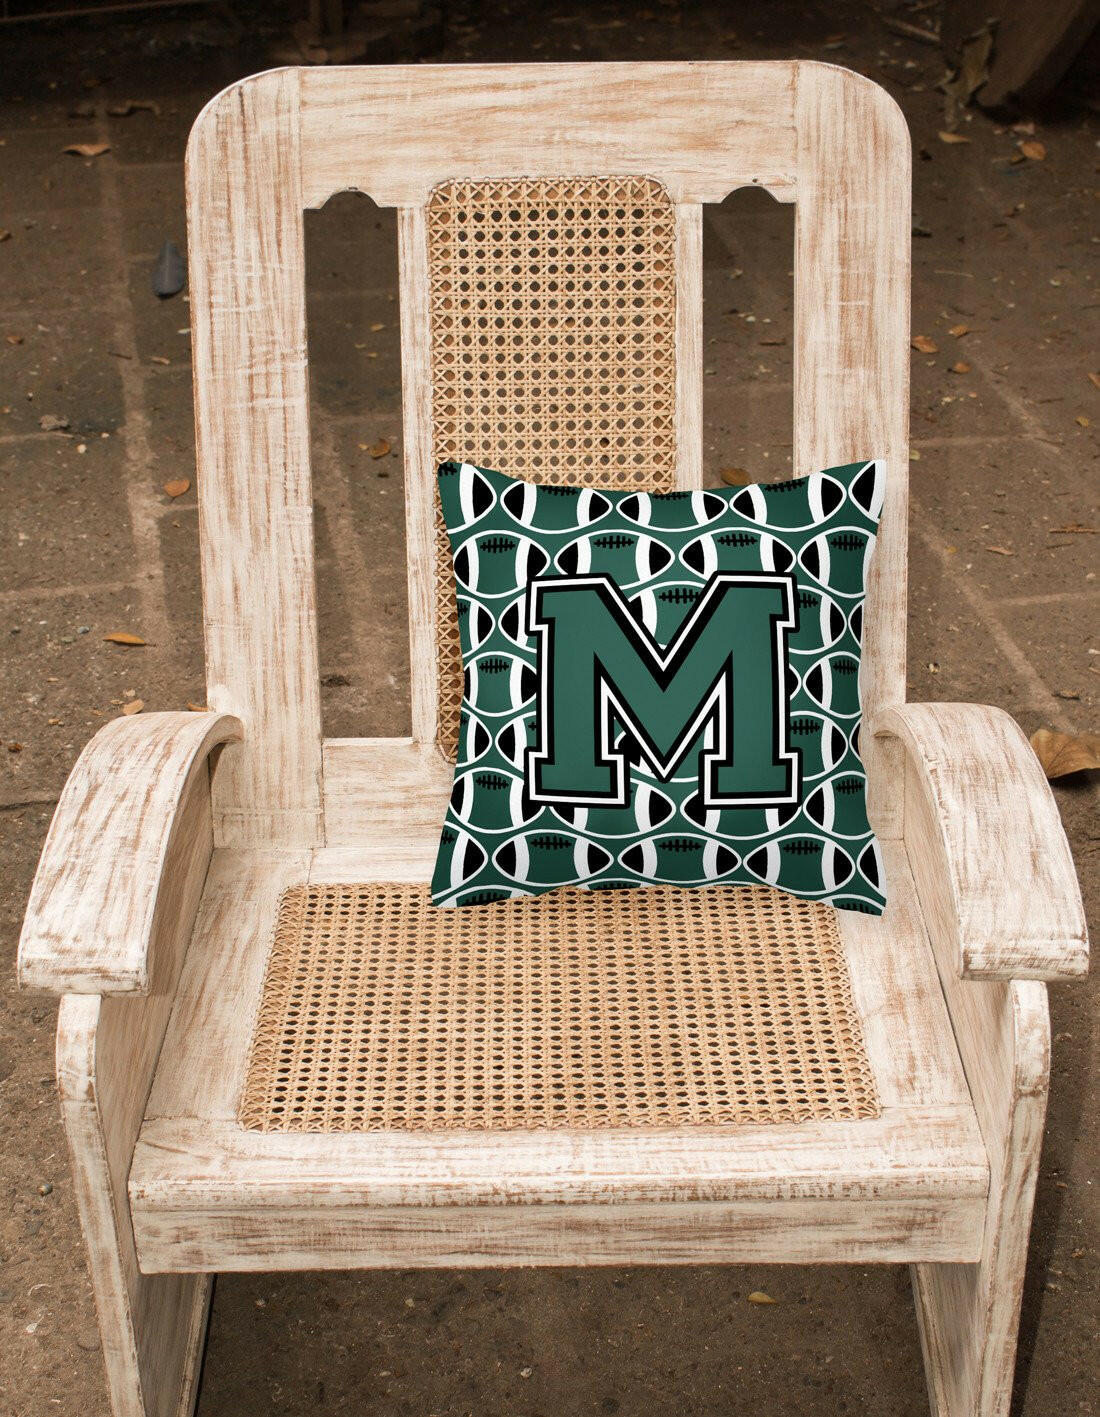 Letter M Football Green and White Fabric Decorative Pillow CJ1071-MPW1414 by Caroline's Treasures